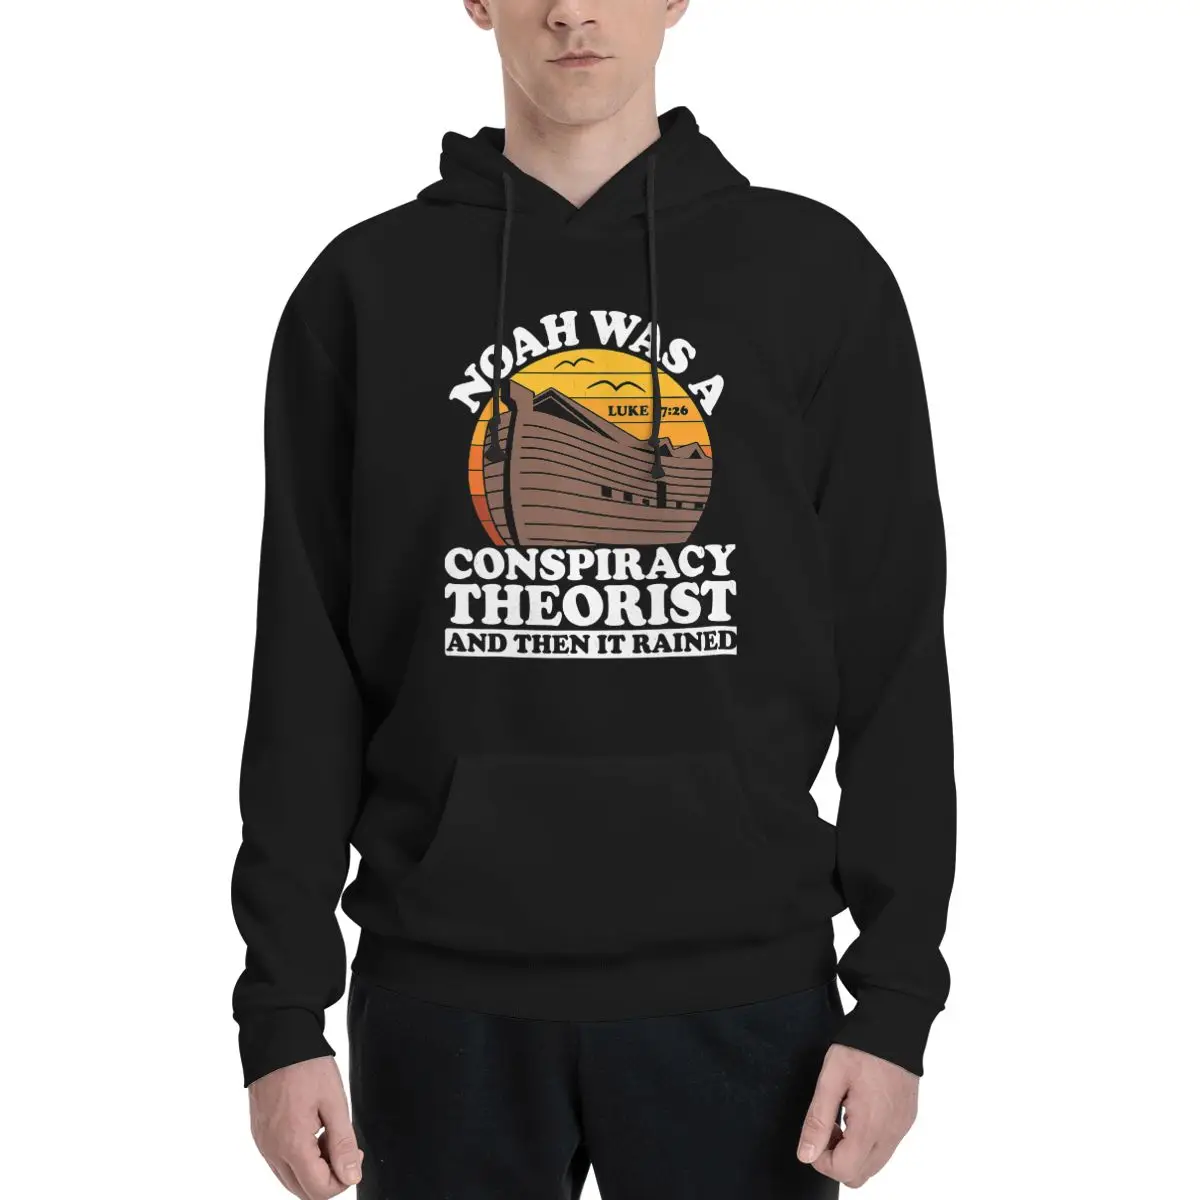 

Conservative Christian Noah Was A Conspiracy Theorist Polyester Hoodie Men's sweatershirt Warm Dif Colors Sizes